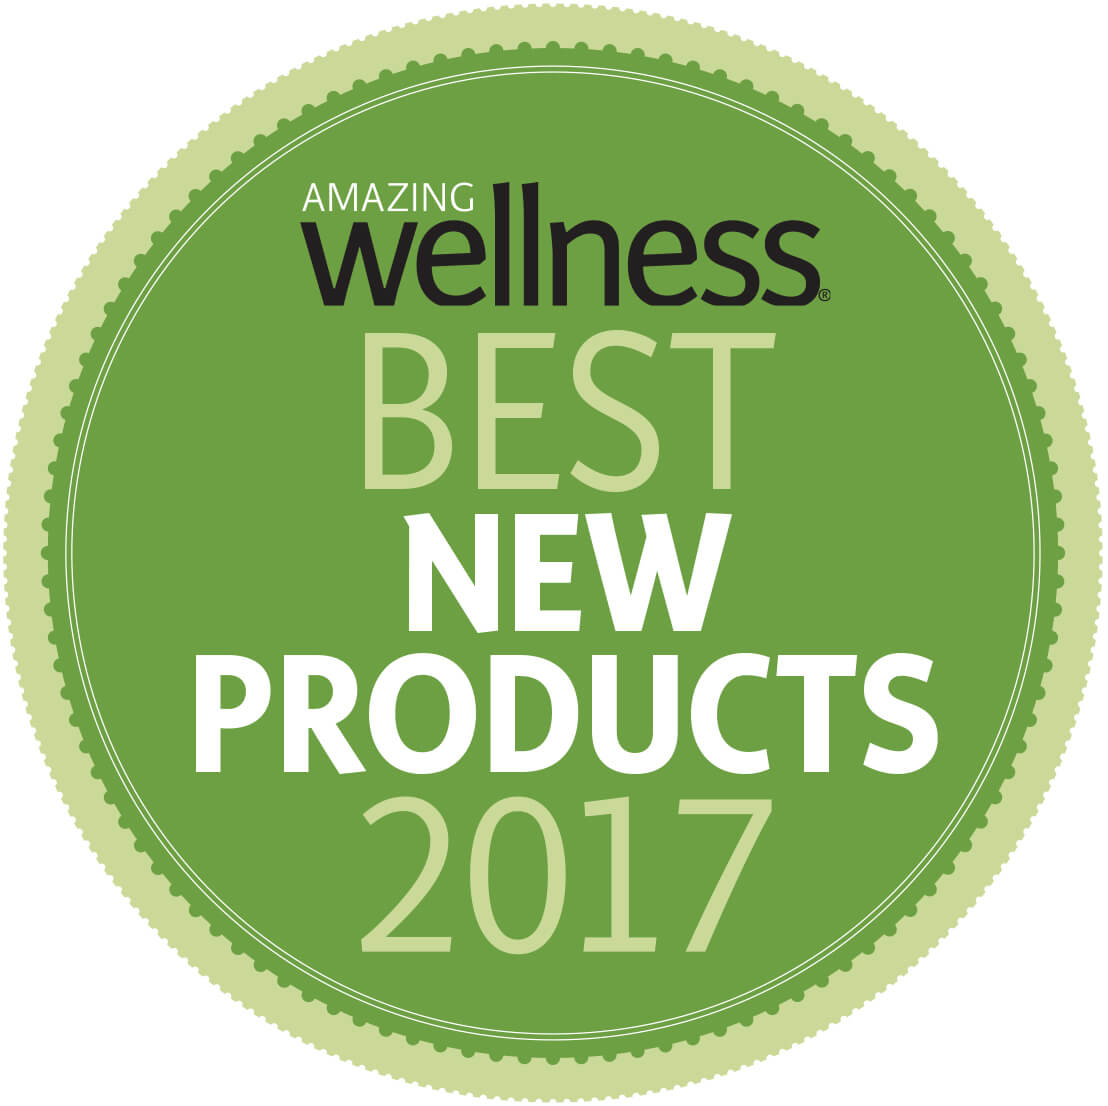 Wellness Best New Products 2017